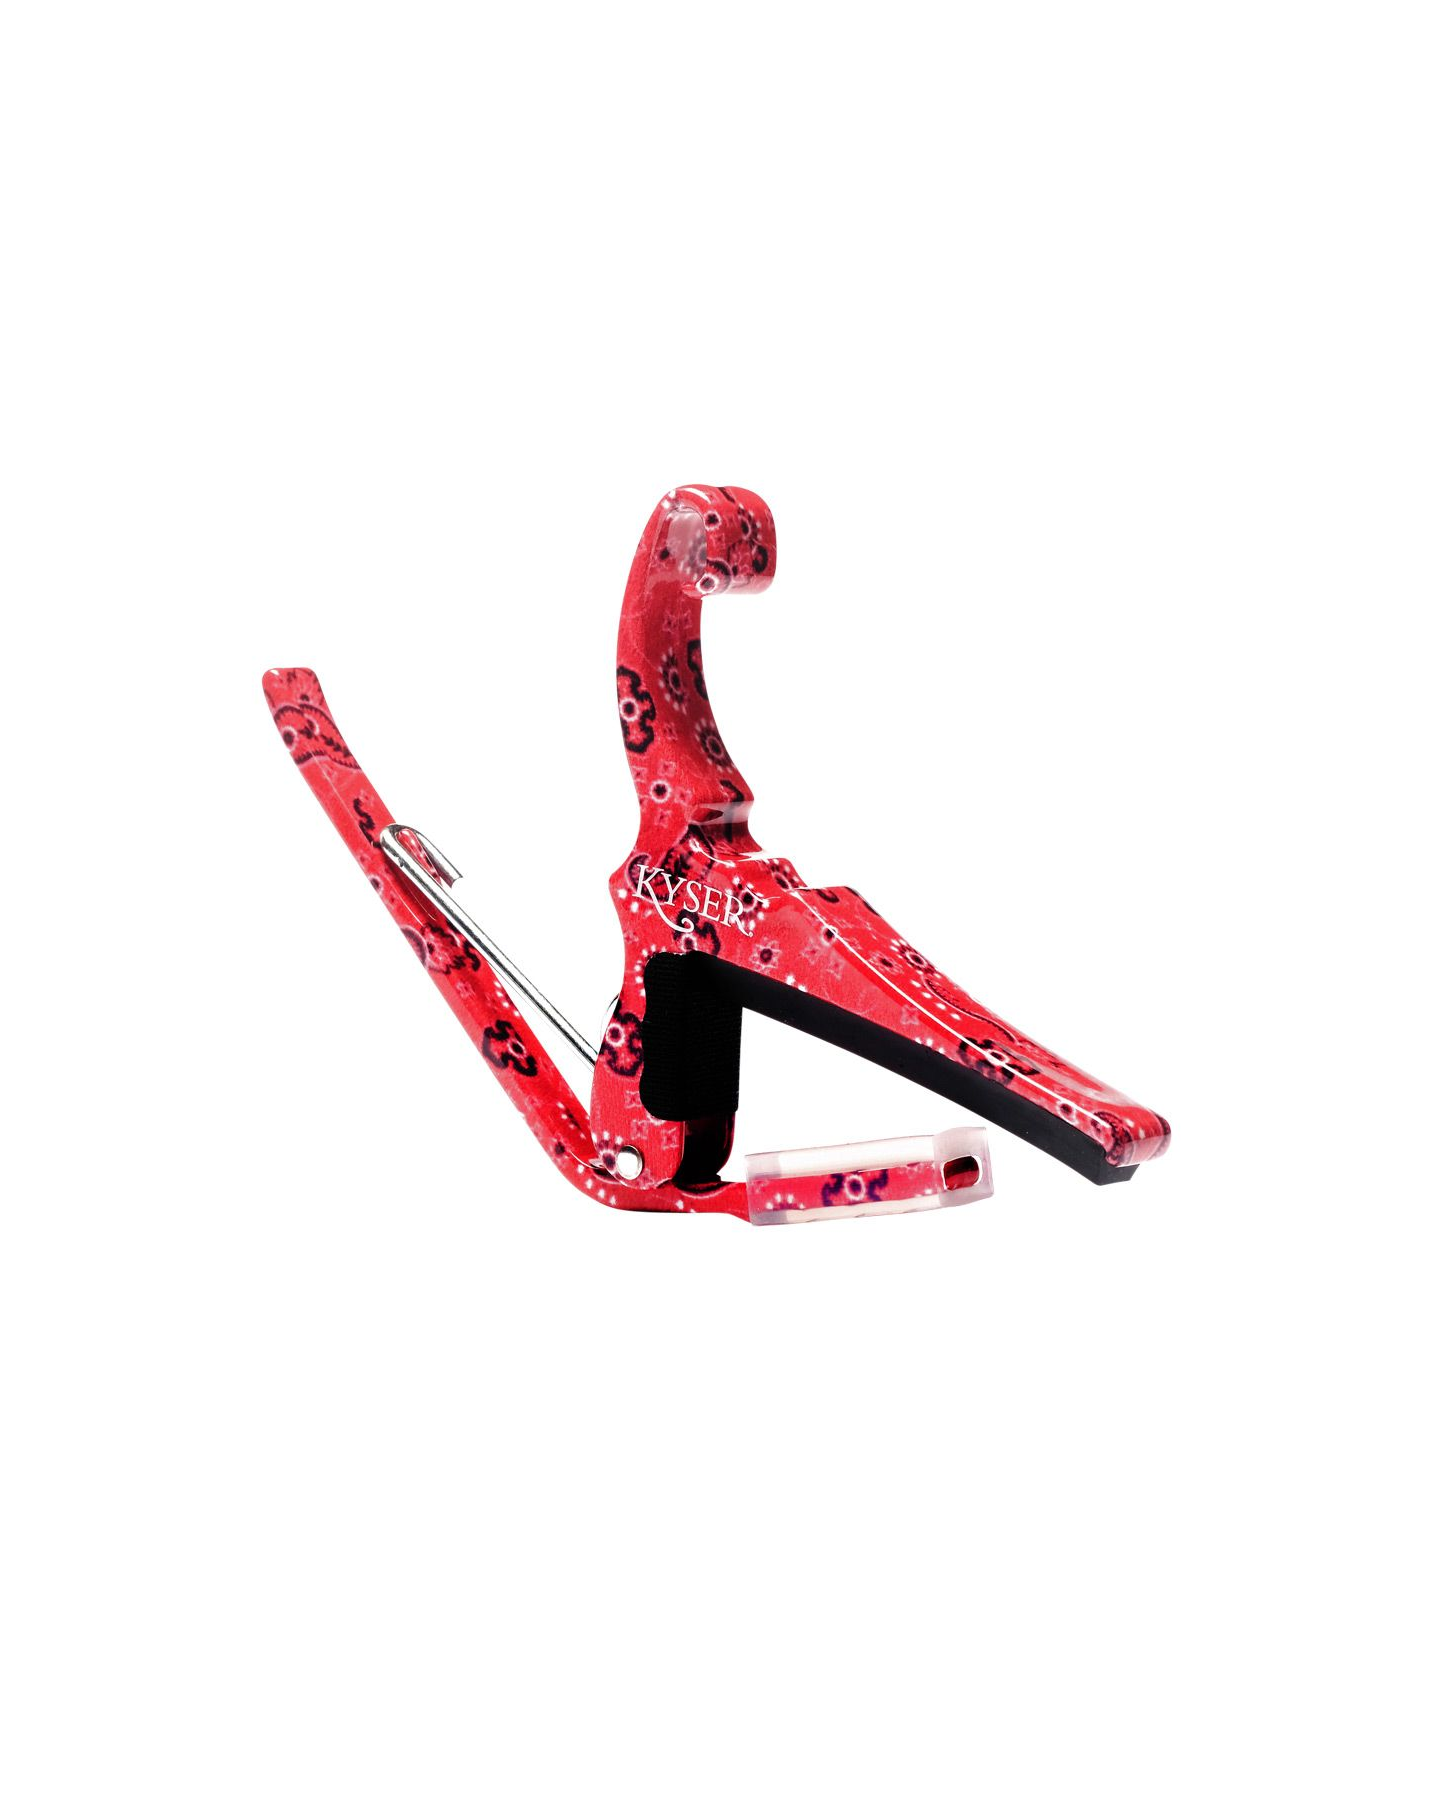 Kyser Quick-Change Capo for 6-String Guitar, Red Bandana